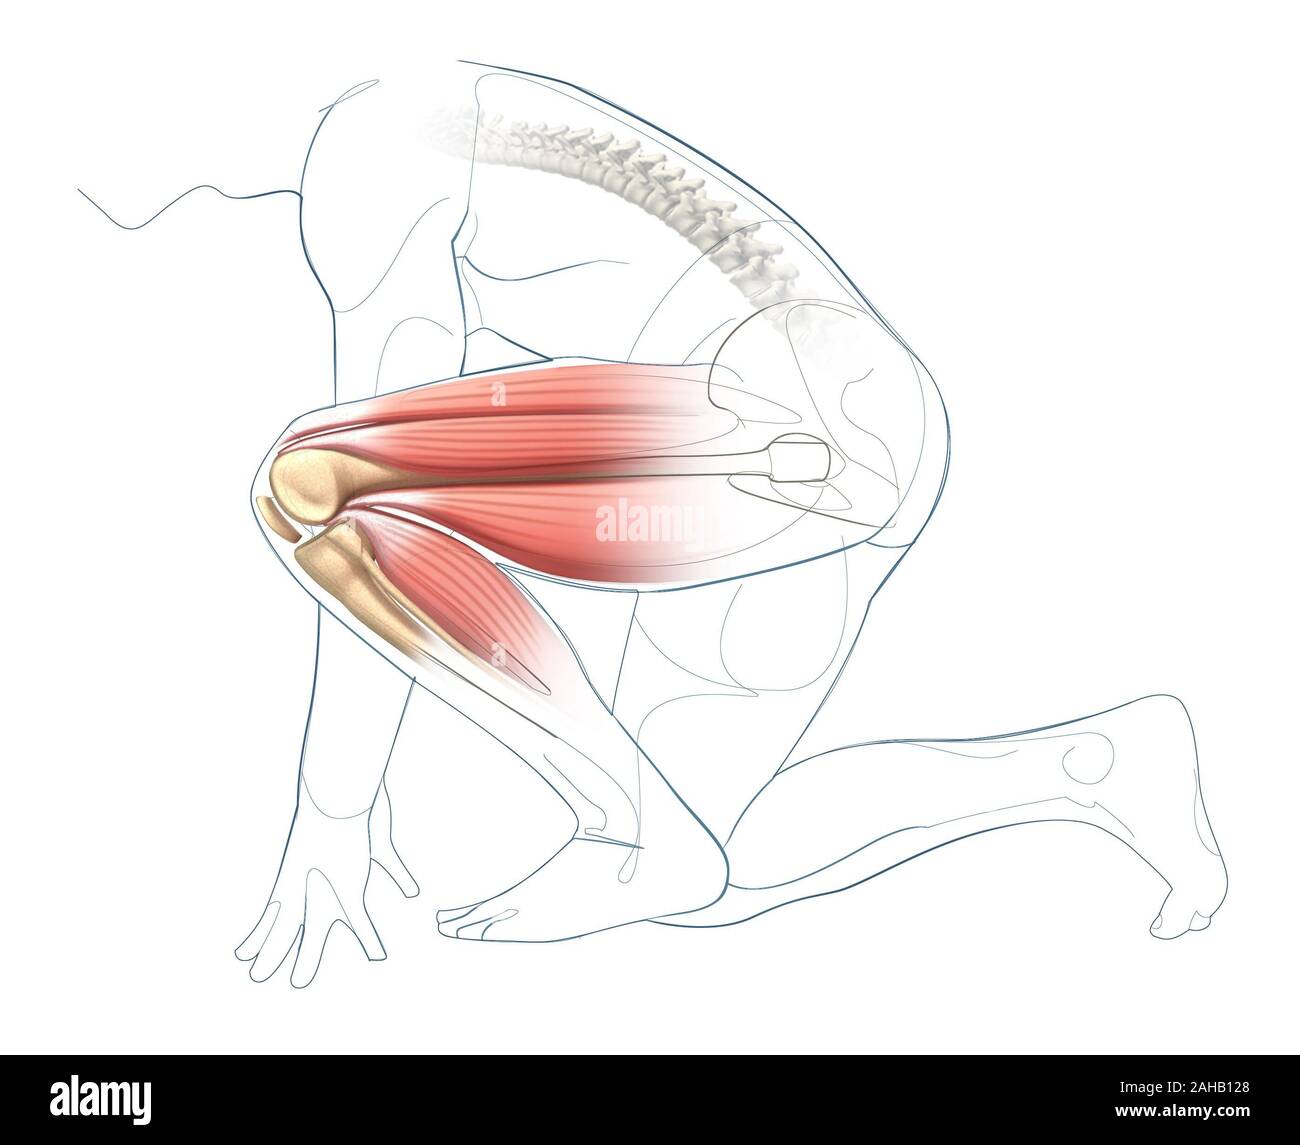 Female Muscles Of The Hip And Upper Leg Stock Photo, Picture and Royalty  Free Image. Image 23222196.